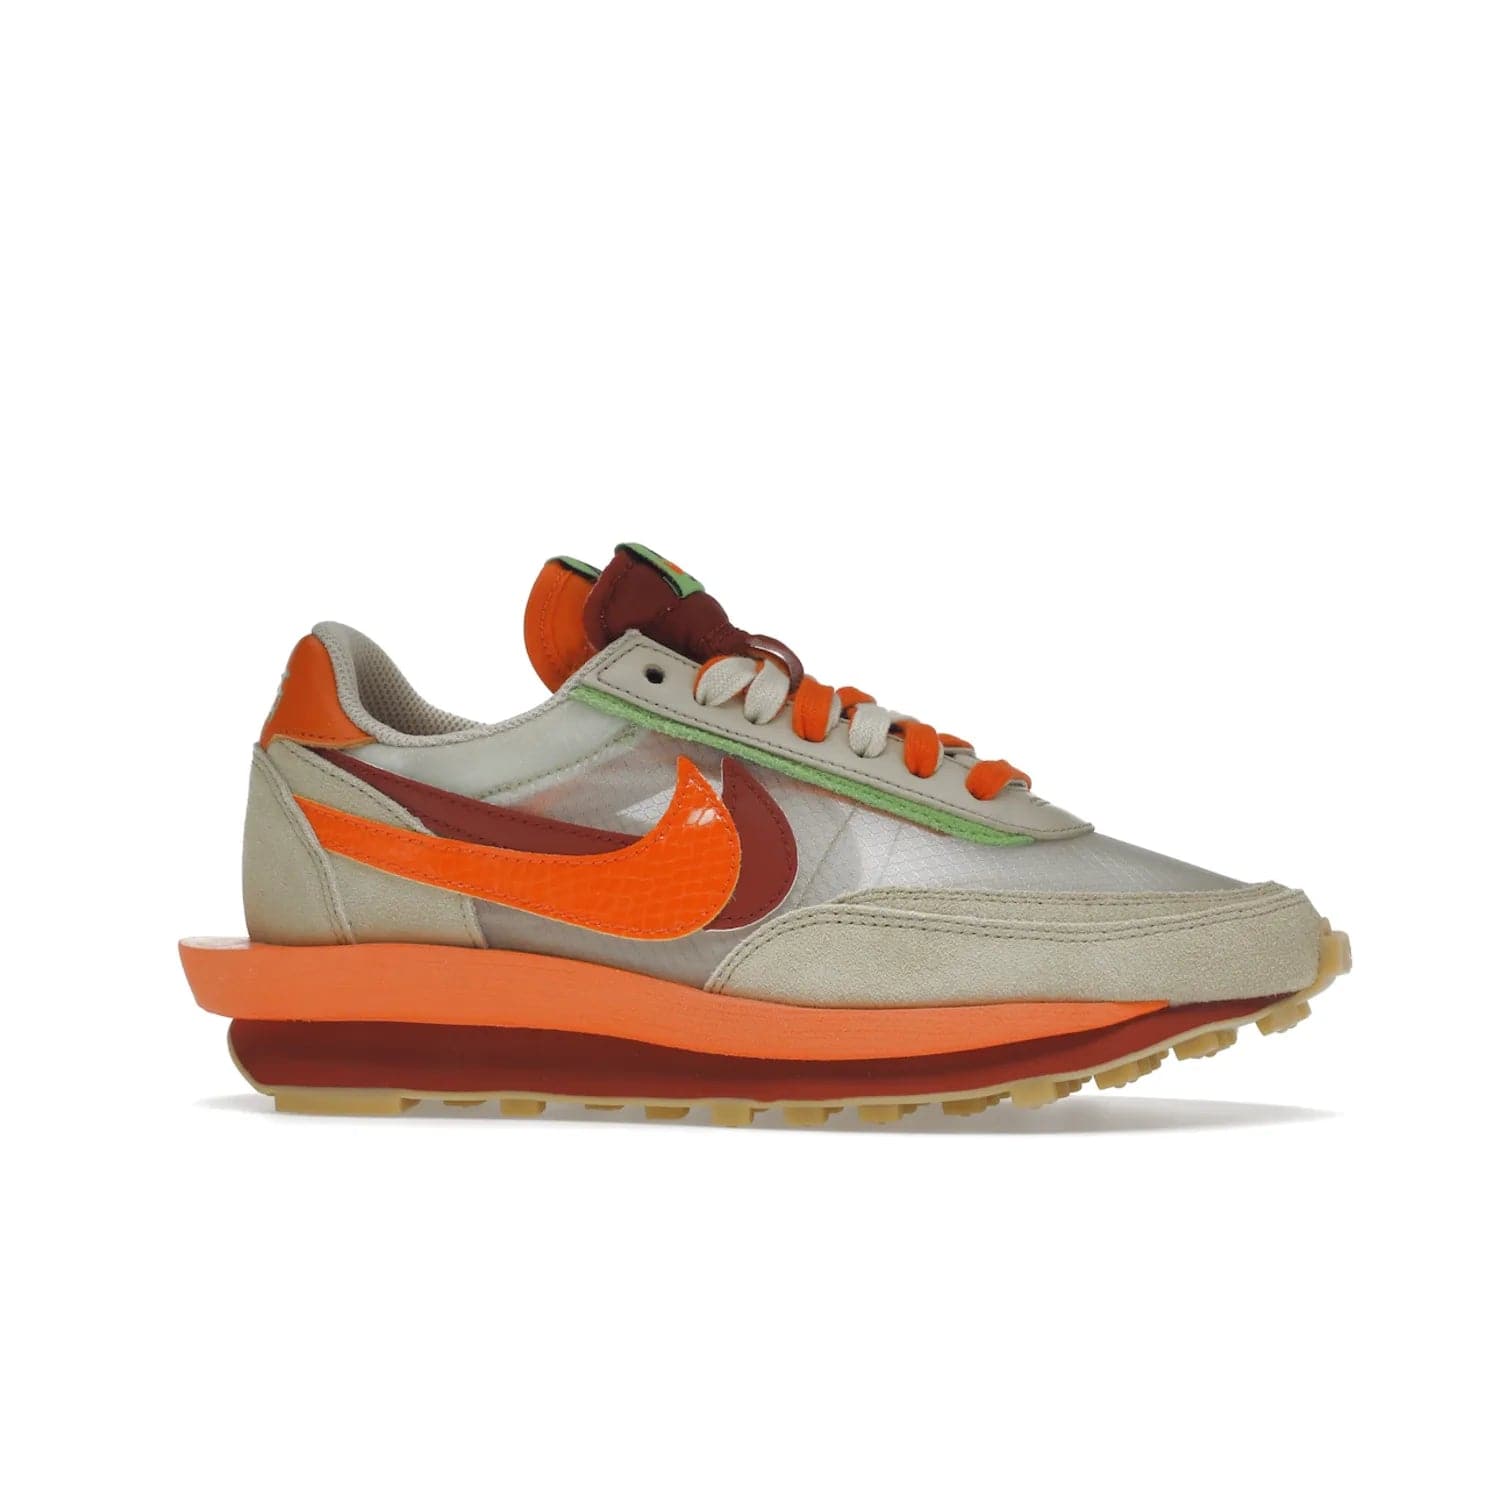 Nike LD Waffle sacai CLOT Kiss of Death Net Orange Blaze - Image 2 - Only at www.BallersClubKickz.com - A bold and stylish Nike LD Waffle sacai CLOT Kiss of Death Net Orange Blaze sneaker featuring a unique off-white, Deep Red & Orange Blaze Swooshes, two-toned stacked sole and doubled tongue. Available in September 2021. Make a statement.